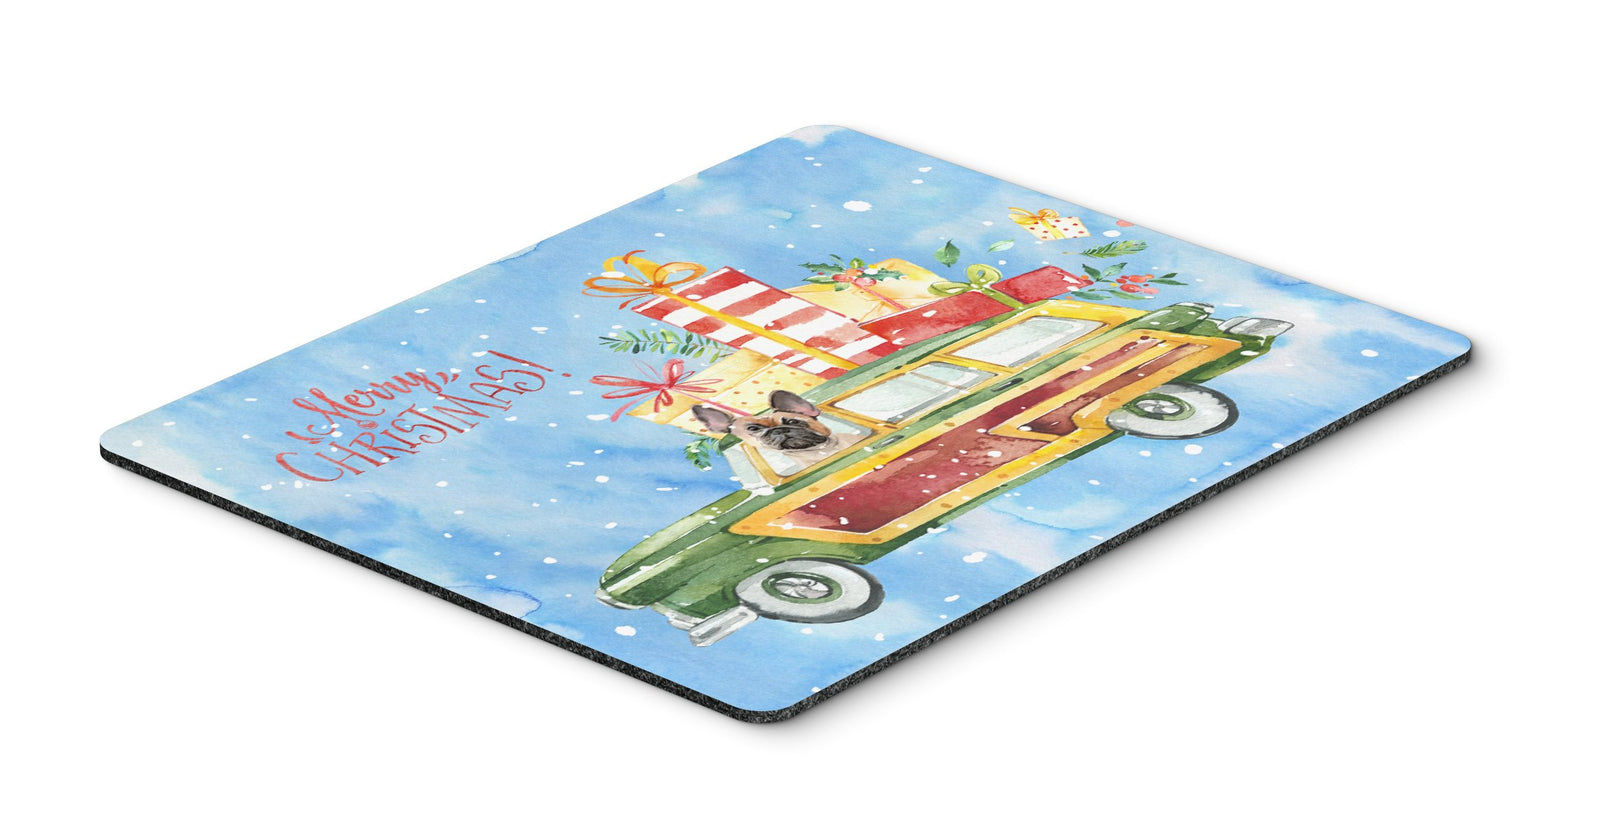 Merry Christmas Fawn French Bulldog Mouse Pad, Hot Pad or Trivet CK2454MP by Caroline's Treasures